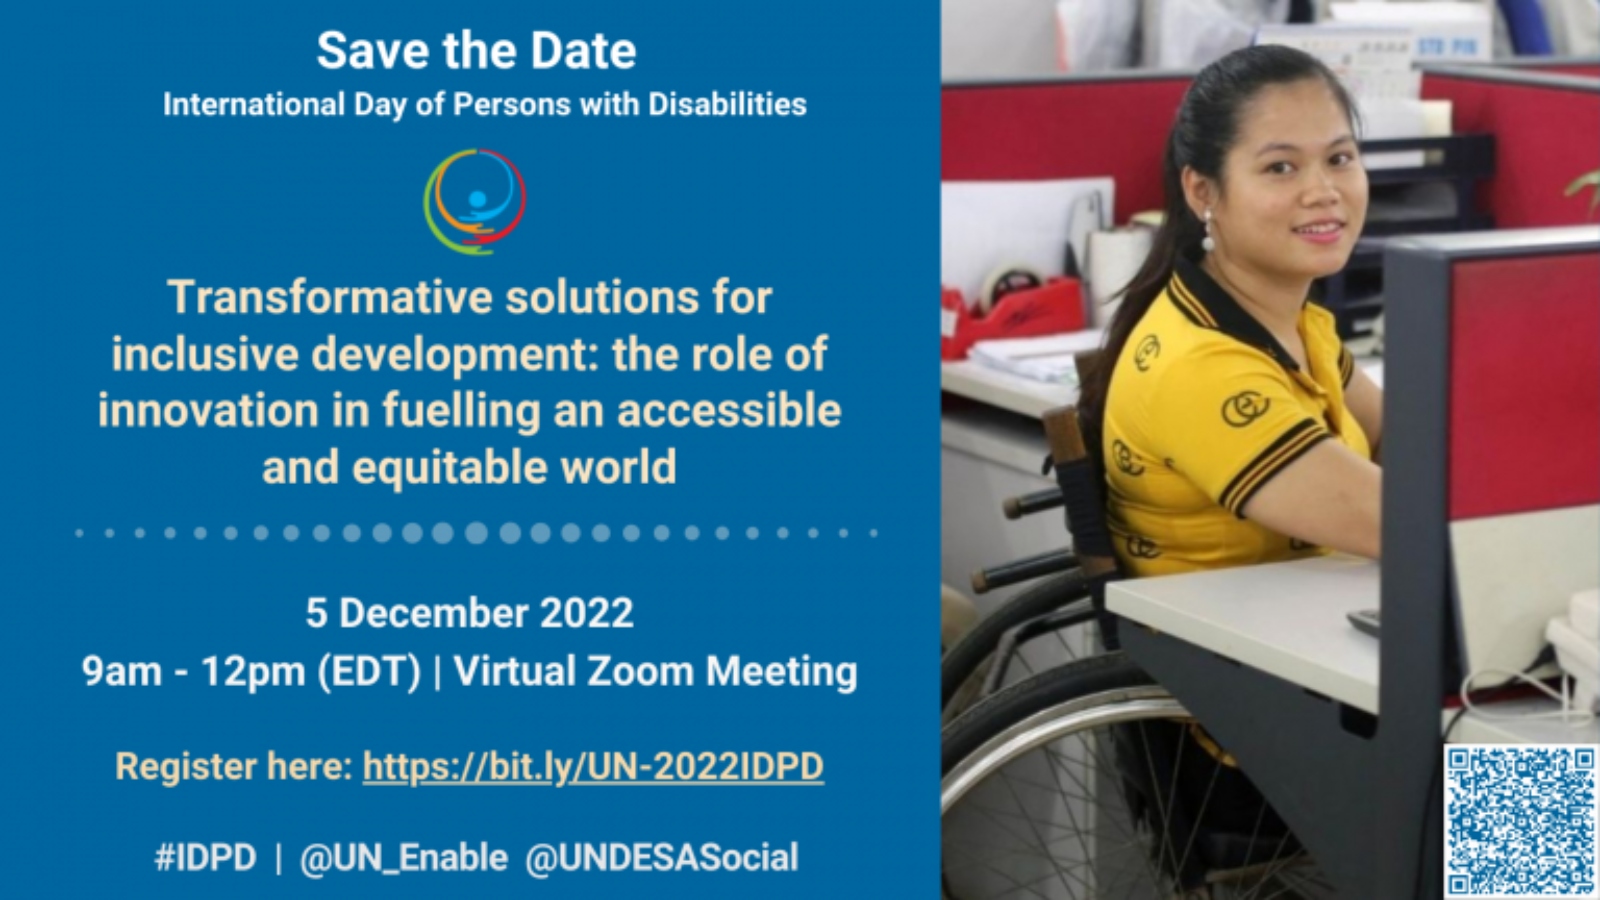 Save the Date IDPD 2022